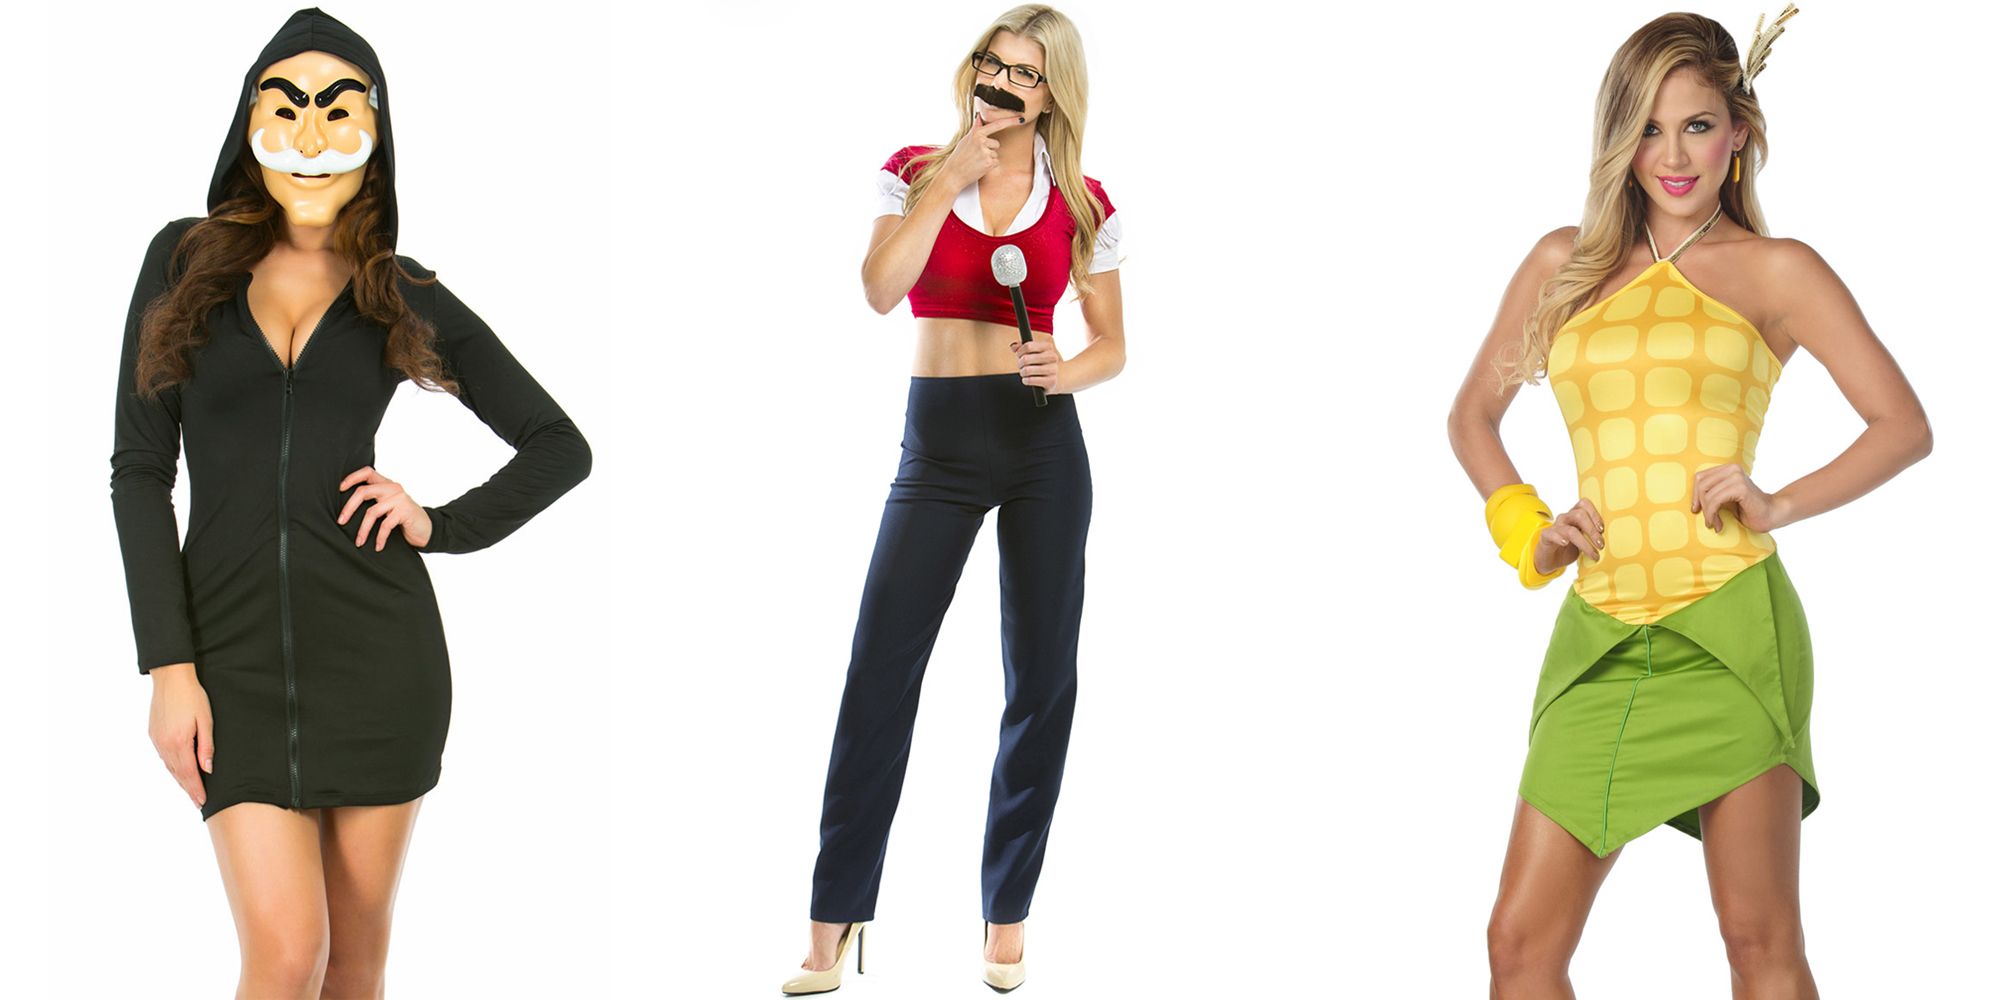 Ridiculous Sexy Halloween Costumes for Women pic pic